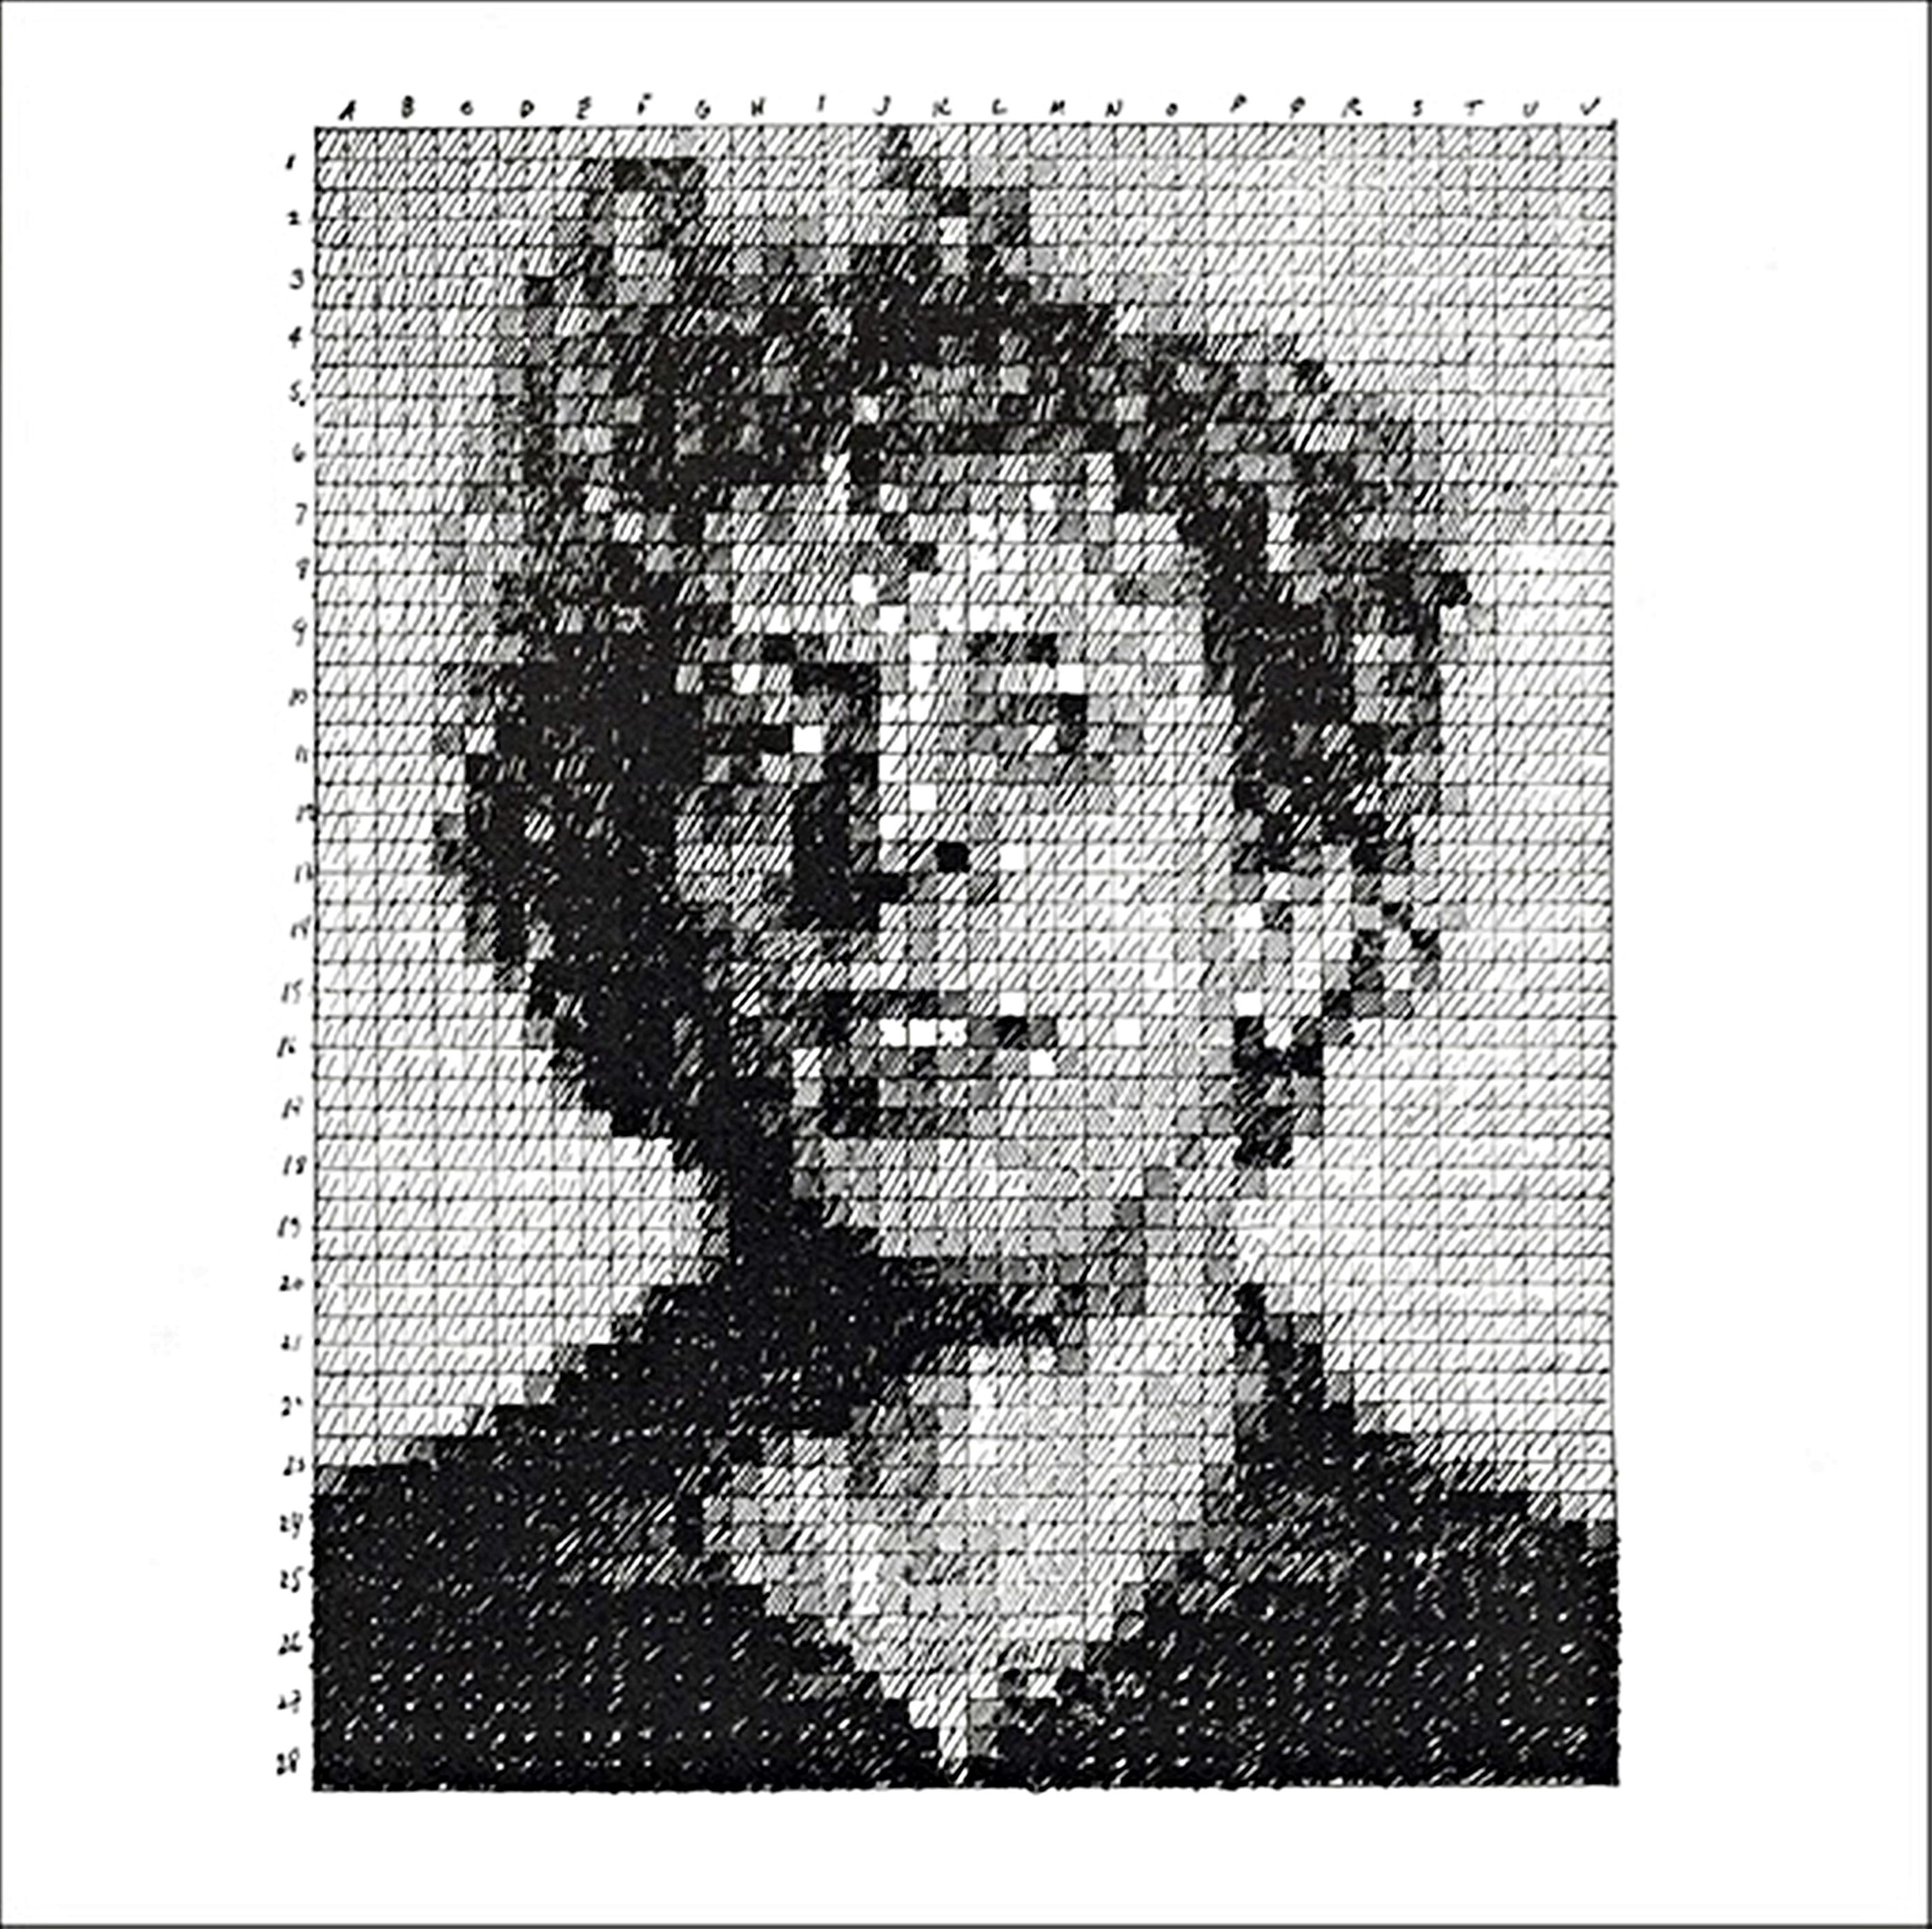 Phil Limited Edition rubber stamp Portrait of Philip Glass, pencil no. 243/1000 - Print by Chuck Close